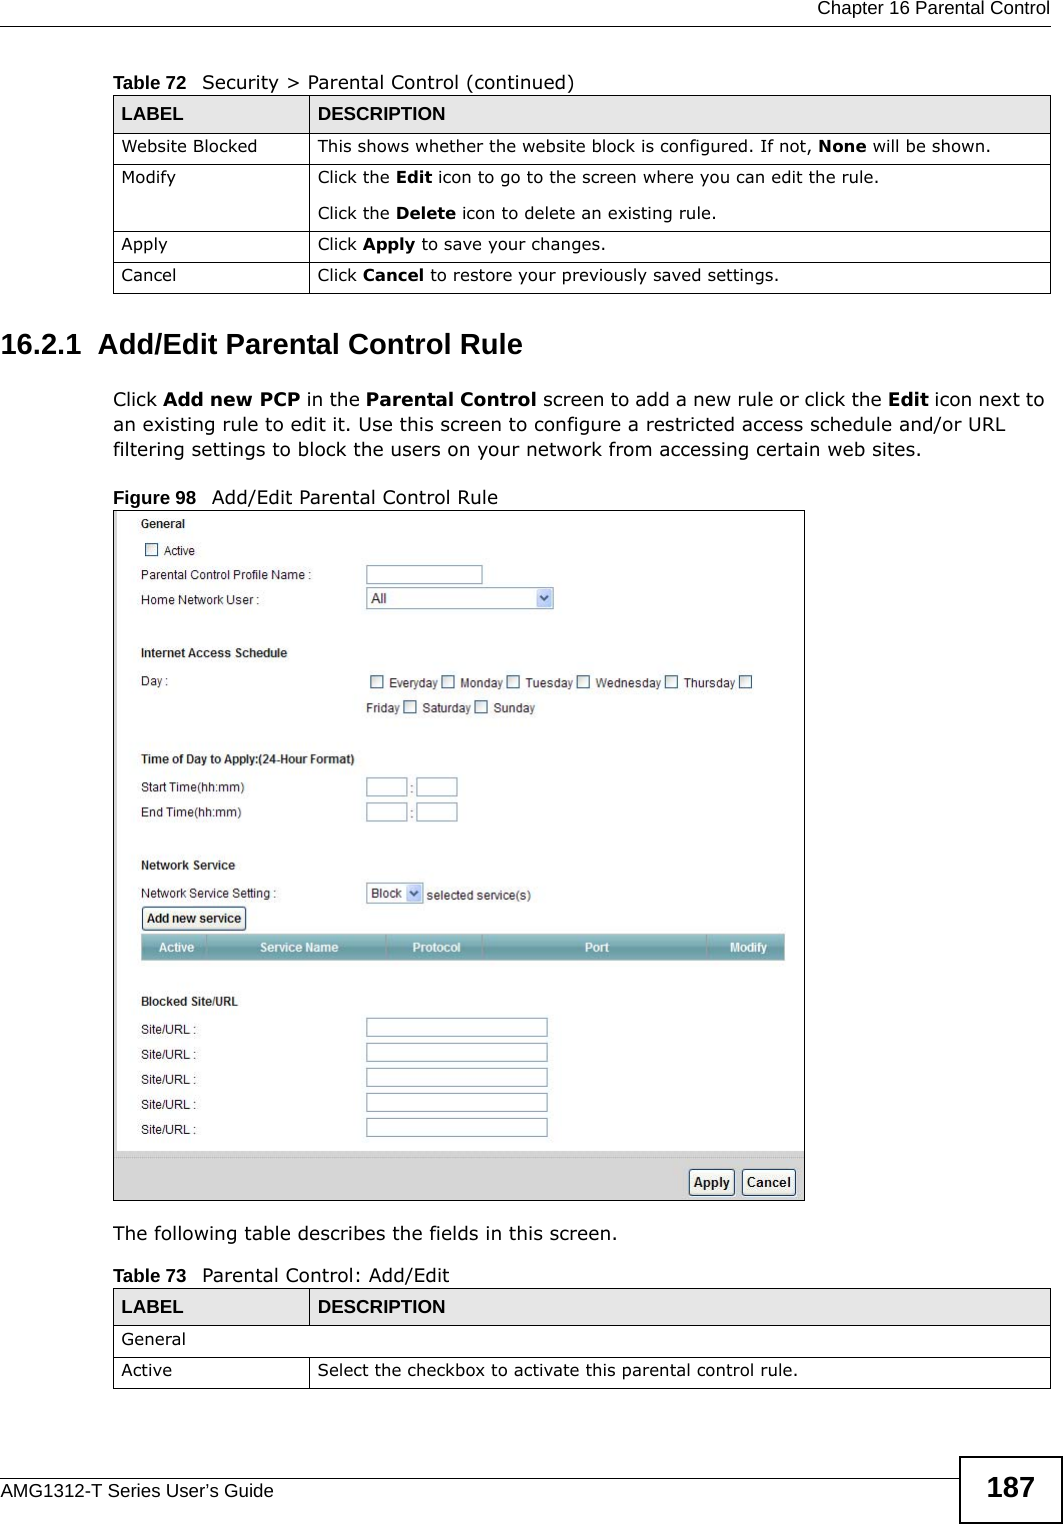  Chapter 16 Parental ControlAMG1312-T Series User’s Guide 18716.2.1  Add/Edit Parental Control RuleClick Add new PCP in the Parental Control screen to add a new rule or click the Edit icon next to an existing rule to edit it. Use this screen to configure a restricted access schedule and/or URL filtering settings to block the users on your network from accessing certain web sites.Figure 98   Add/Edit Parental Control Rule The following table describes the fields in this screen. Website Blocked This shows whether the website block is configured. If not, None will be shown.Modify Click the Edit icon to go to the screen where you can edit the rule.Click the Delete icon to delete an existing rule.Apply Click Apply to save your changes.Cancel Click Cancel to restore your previously saved settings.Table 72   Security &gt; Parental Control (continued)LABEL DESCRIPTIONTable 73   Parental Control: Add/EditLABEL DESCRIPTIONGeneralActive Select the checkbox to activate this parental control rule.